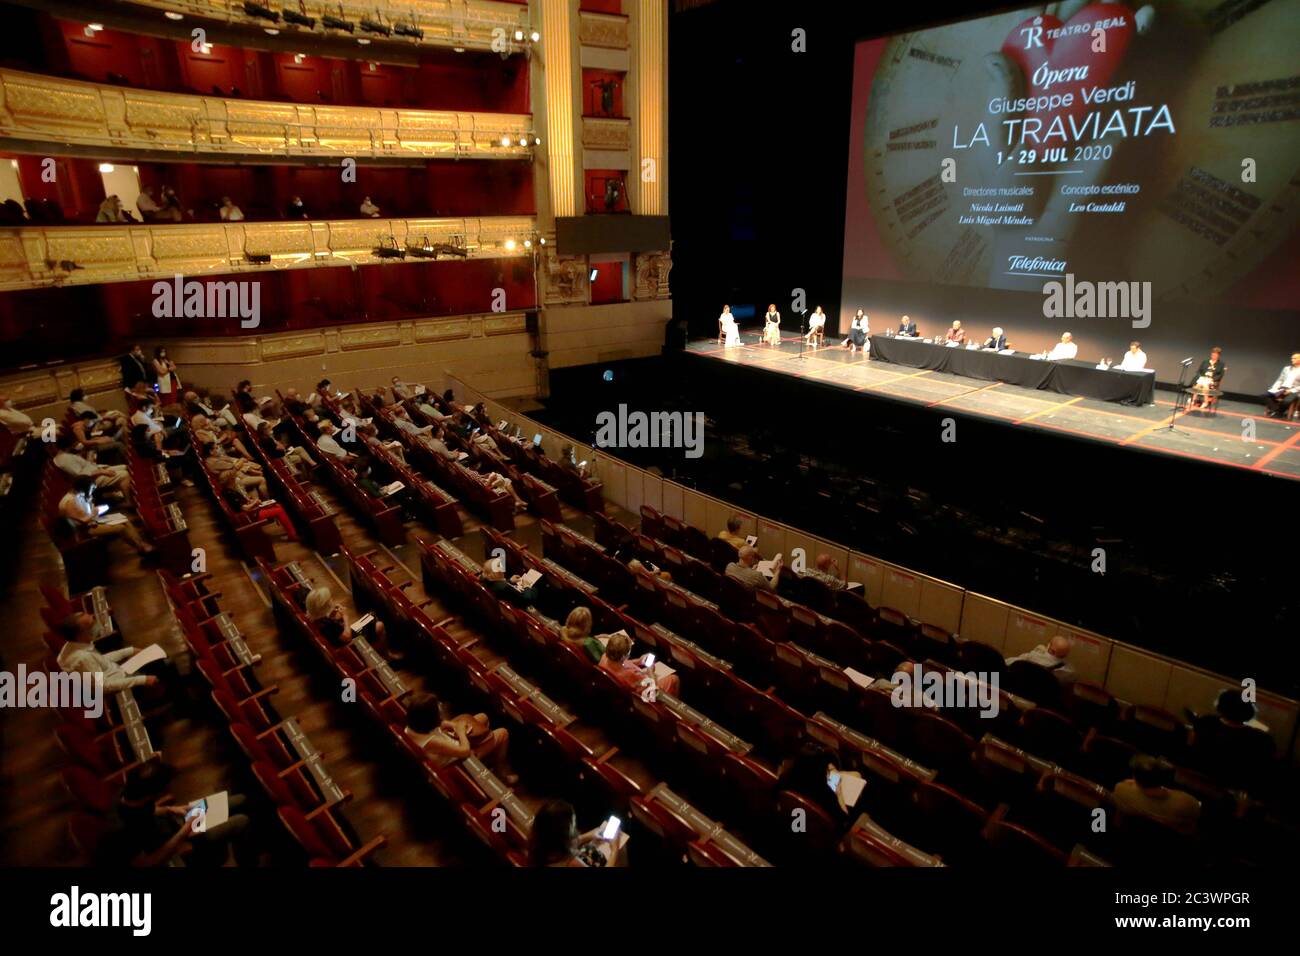 Madrid, Spain; 22(06/2020.- "We sing against fear, Teatro Real de  Madrid".The Teatro Real de Madrid opens its doors on July 1 with a strict  protocol of health security and presenting La Traviata